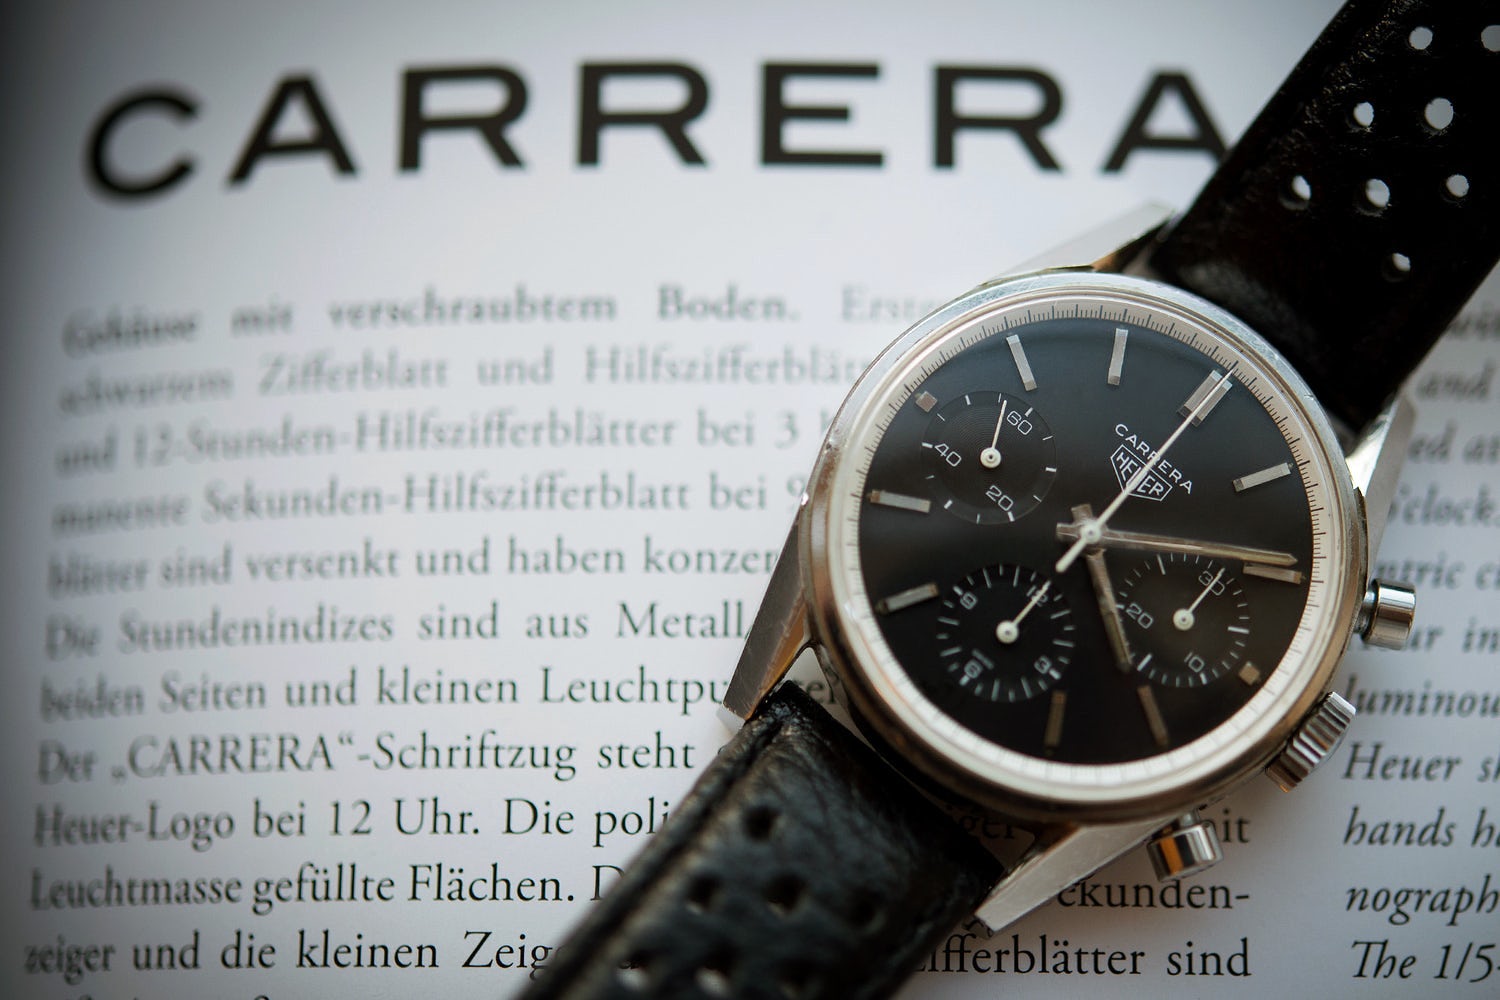 These are hands down the best vintage Carrera re-issues since the